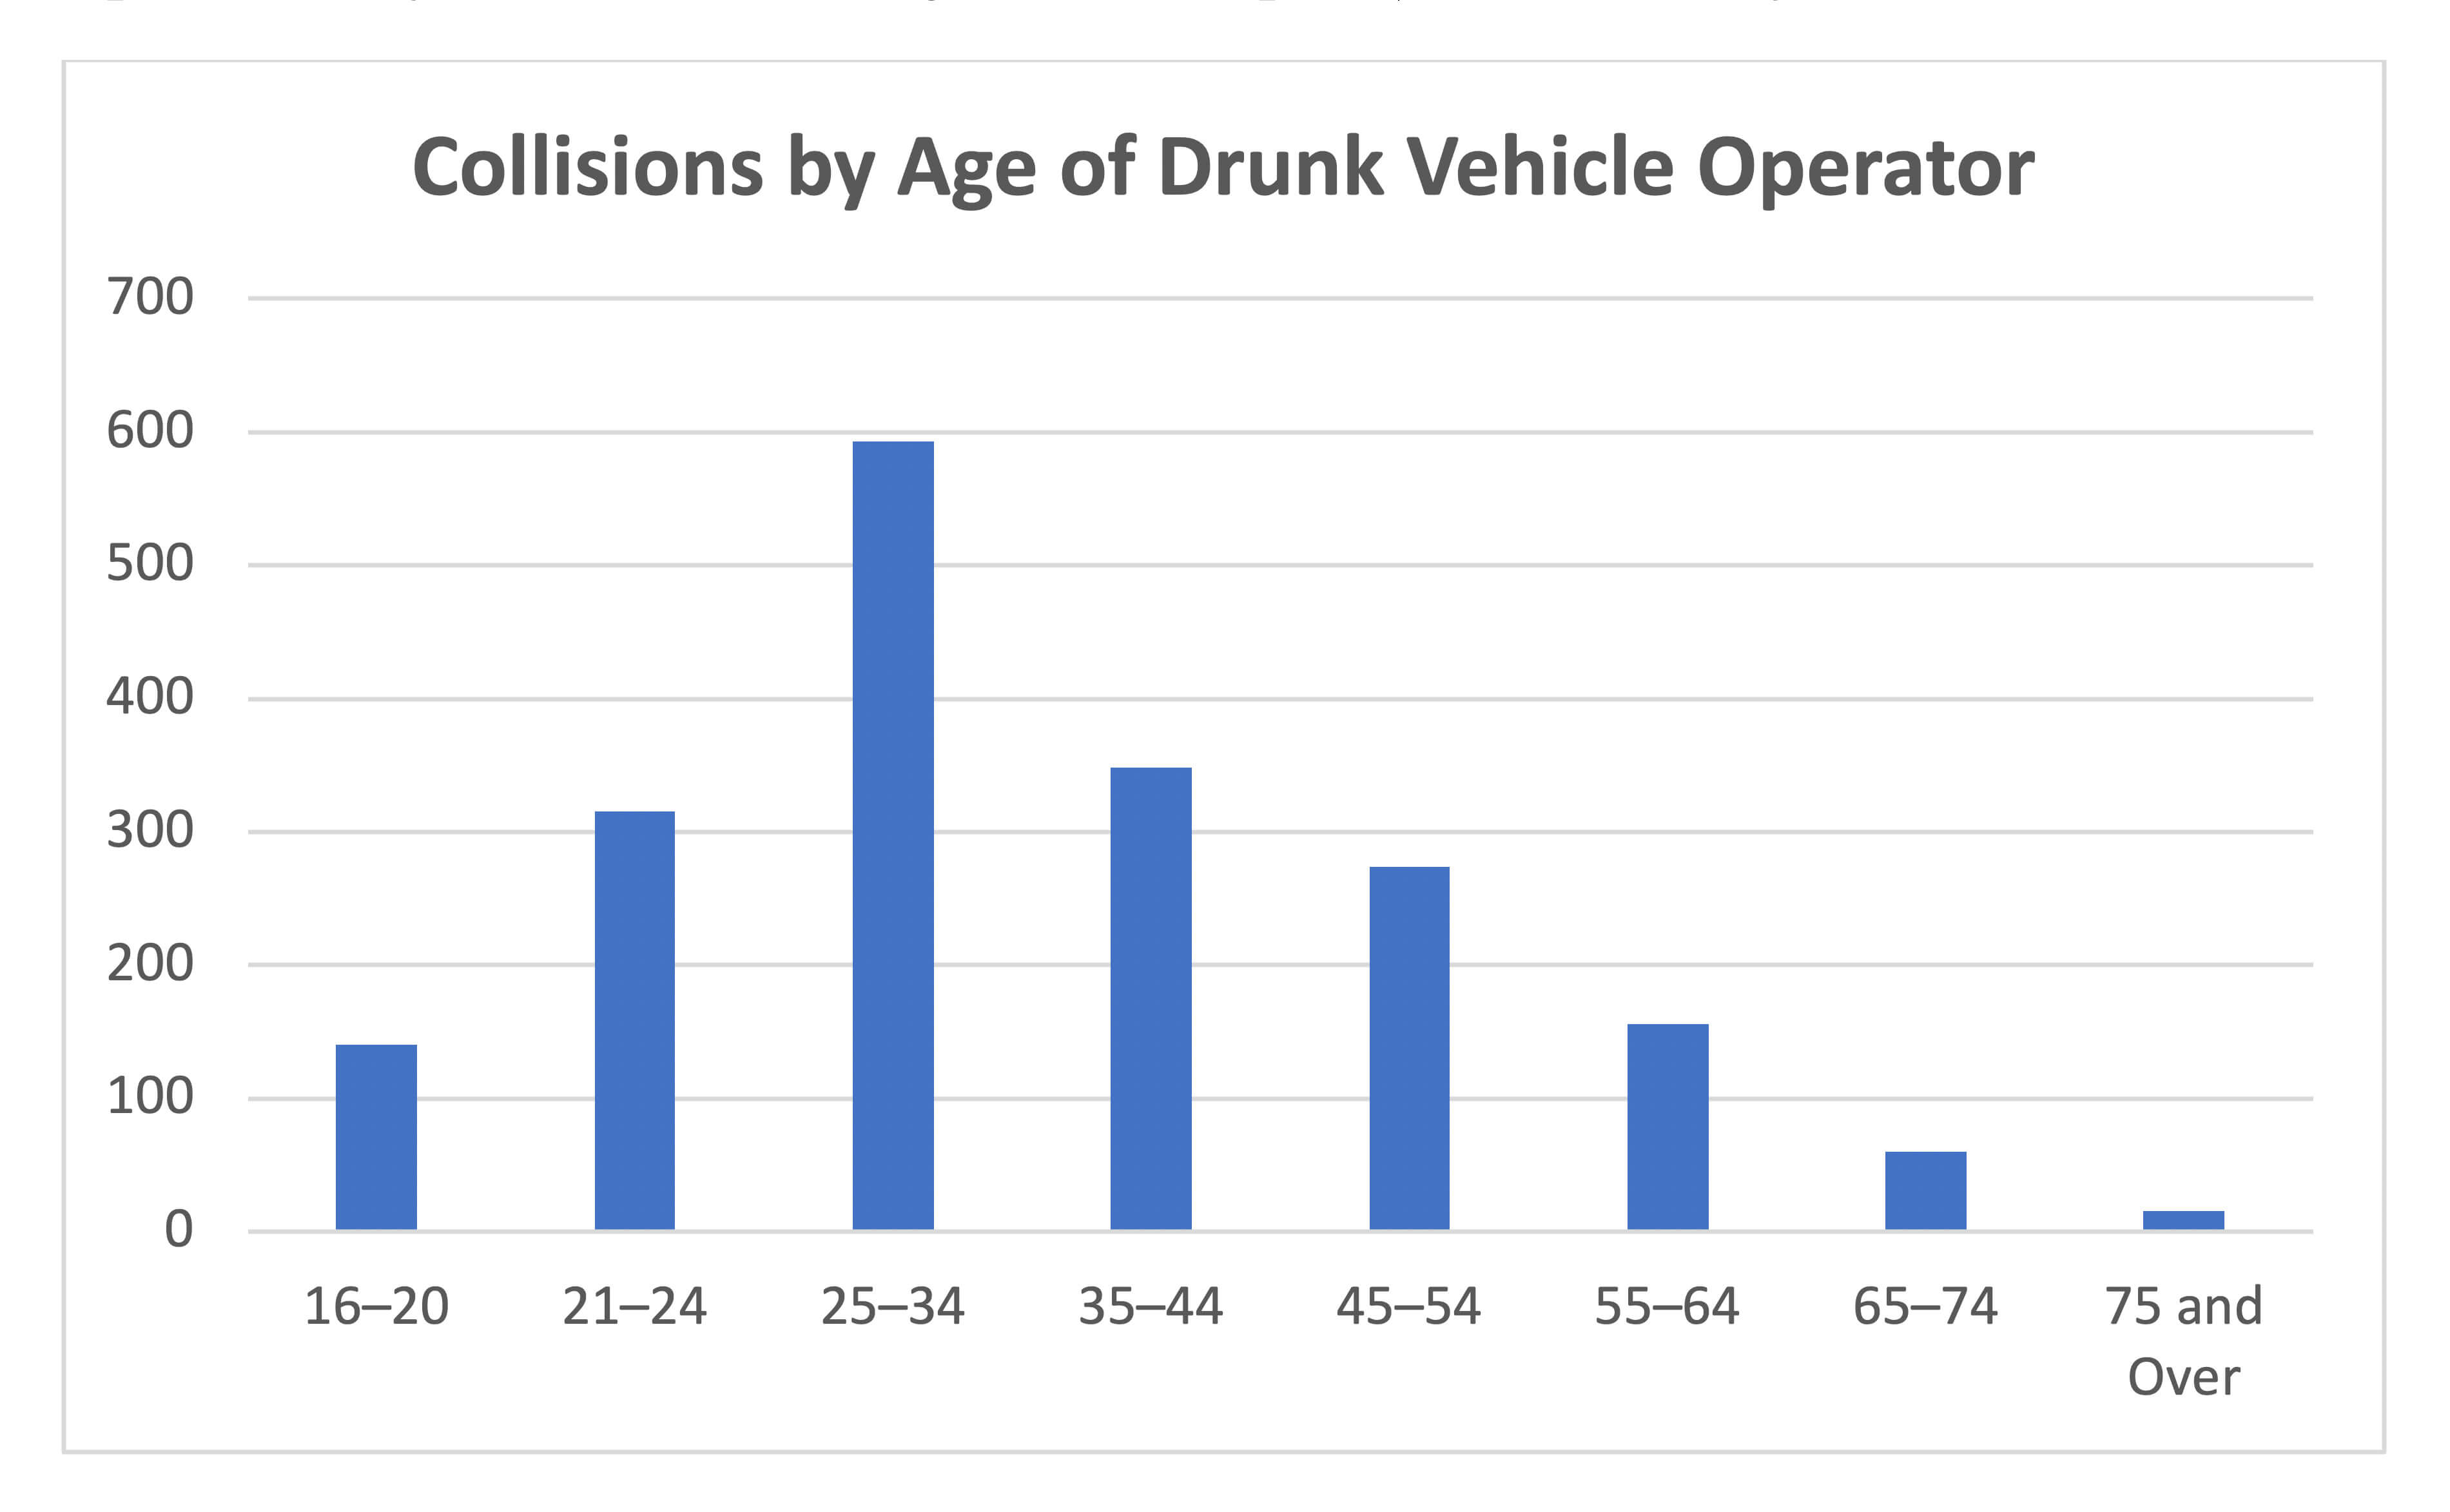 Collisions by age of drunk vehicle operators in Ontario